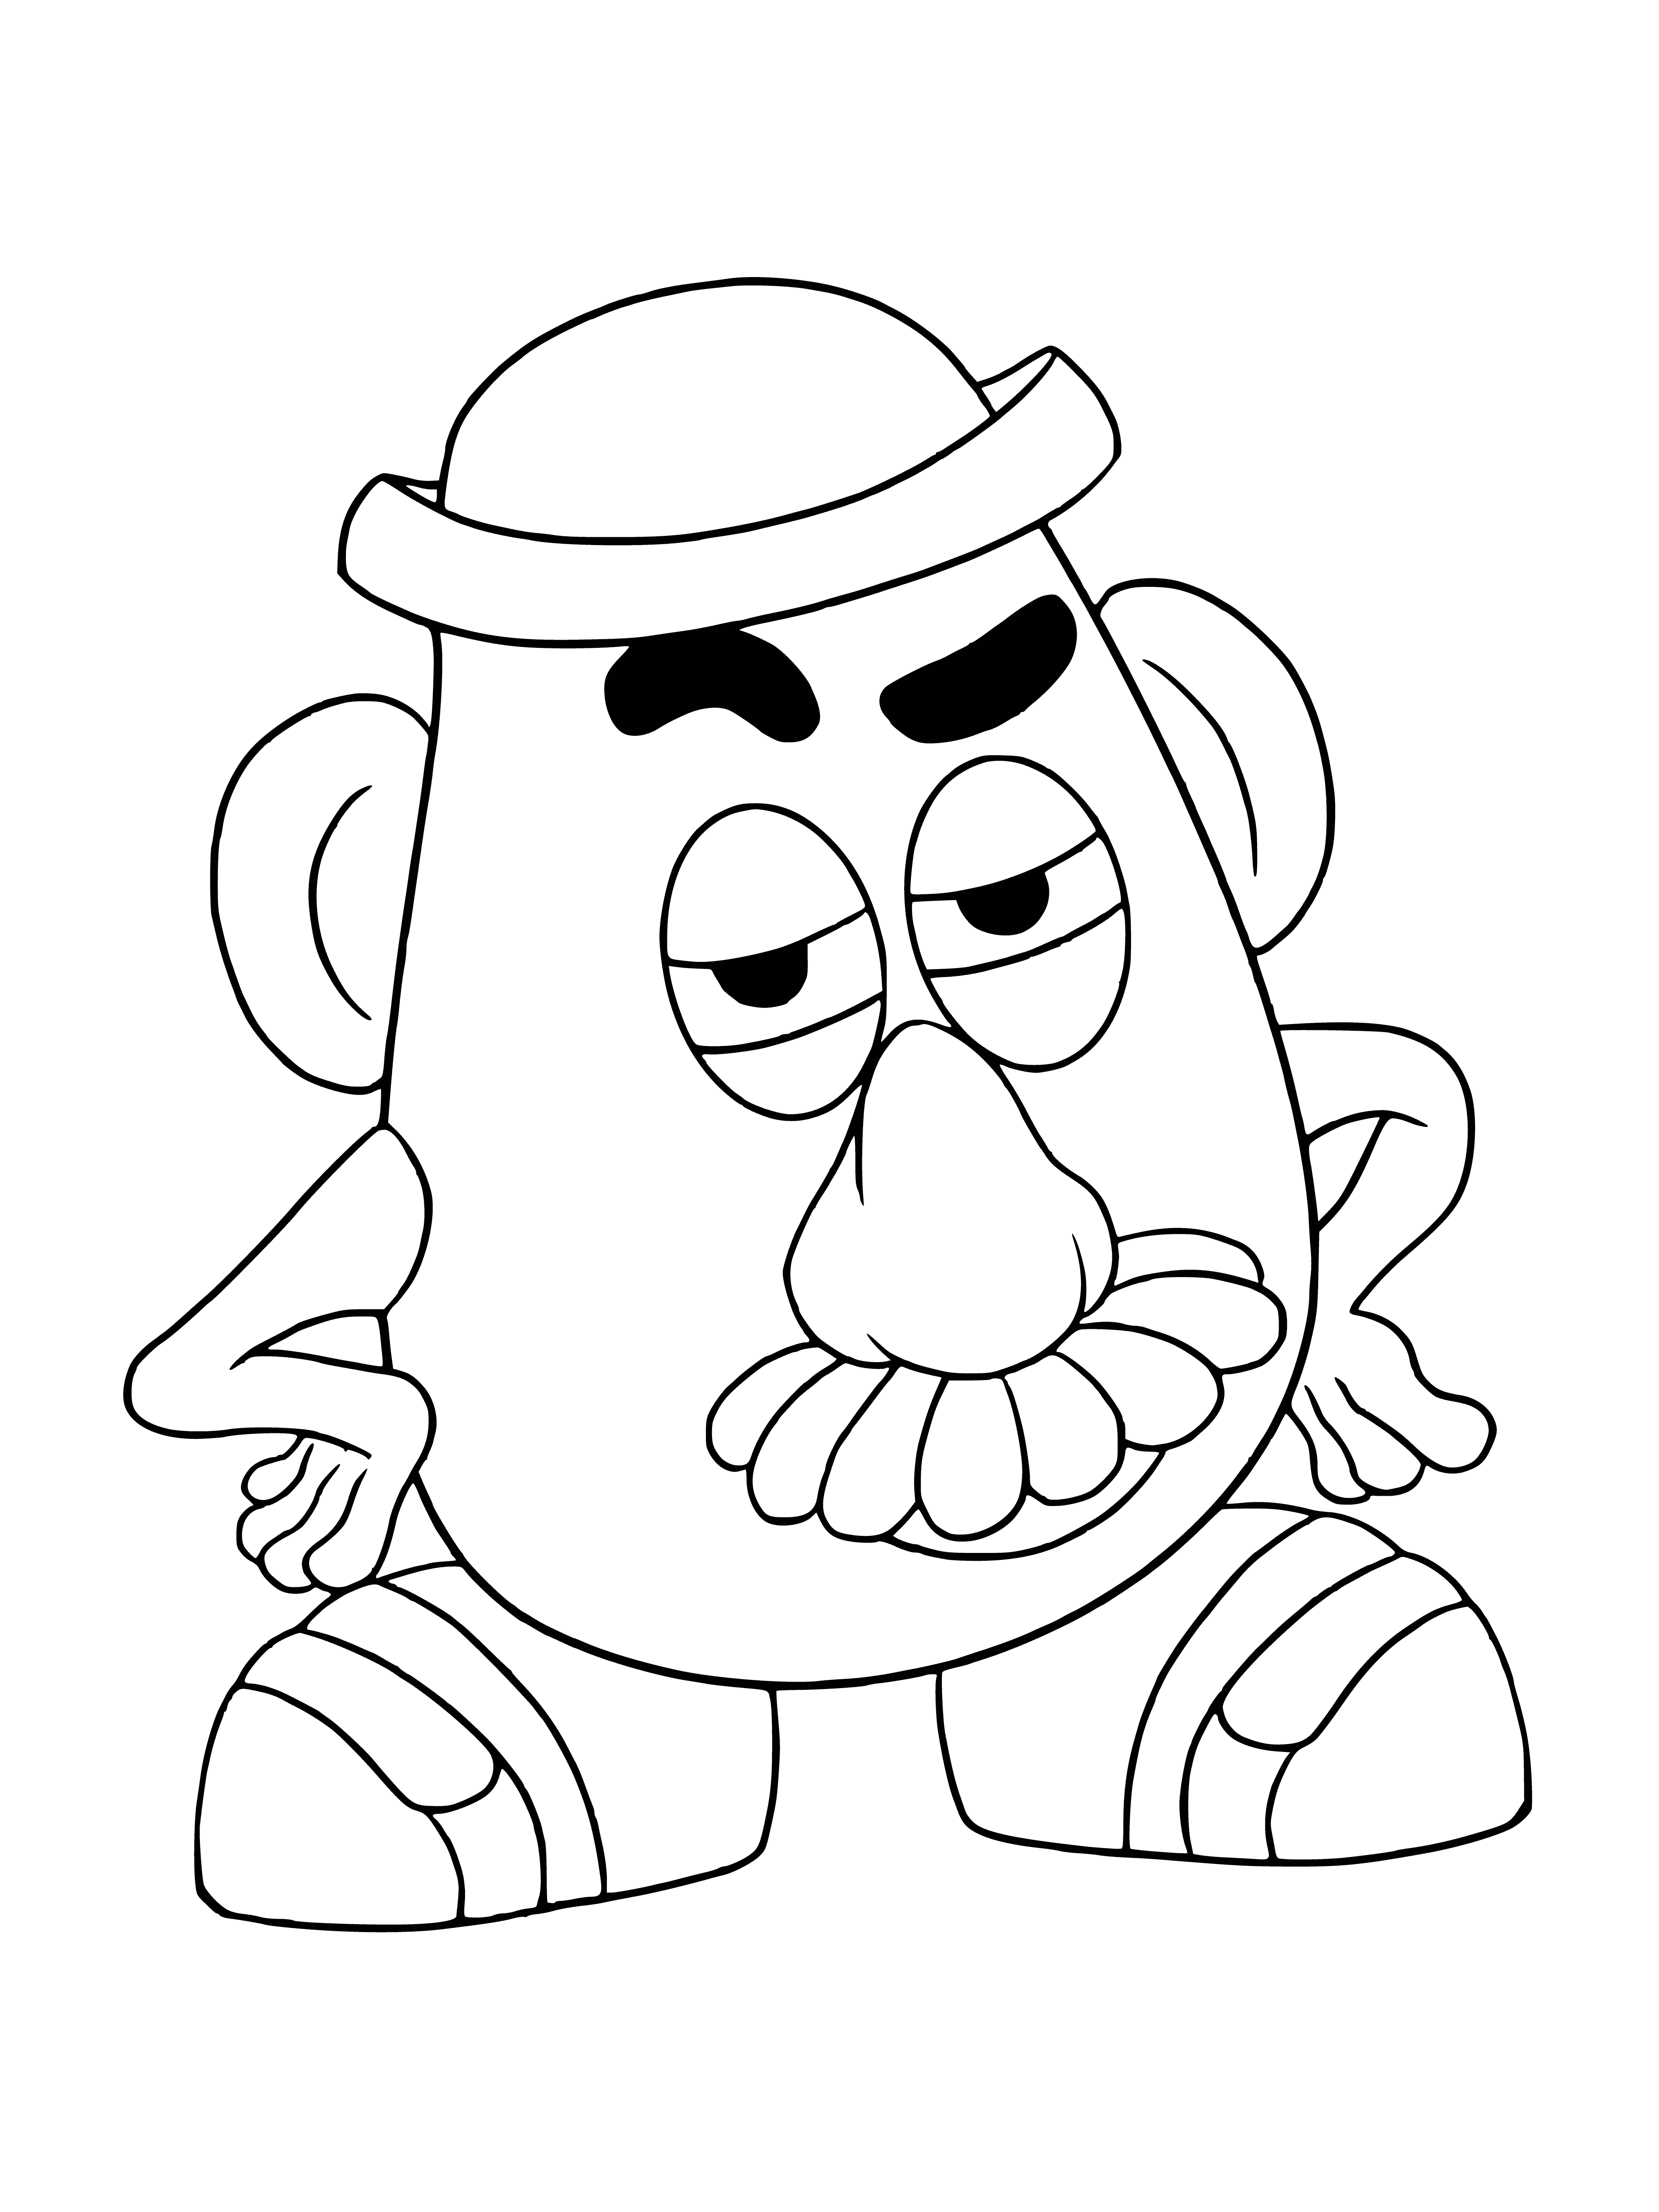 coloring page: Classic Mr Potato Head toy with removable parts - eyes, nose, mouth, ears, hat, shoes - in a variety of colors. #ChildhoodMemories